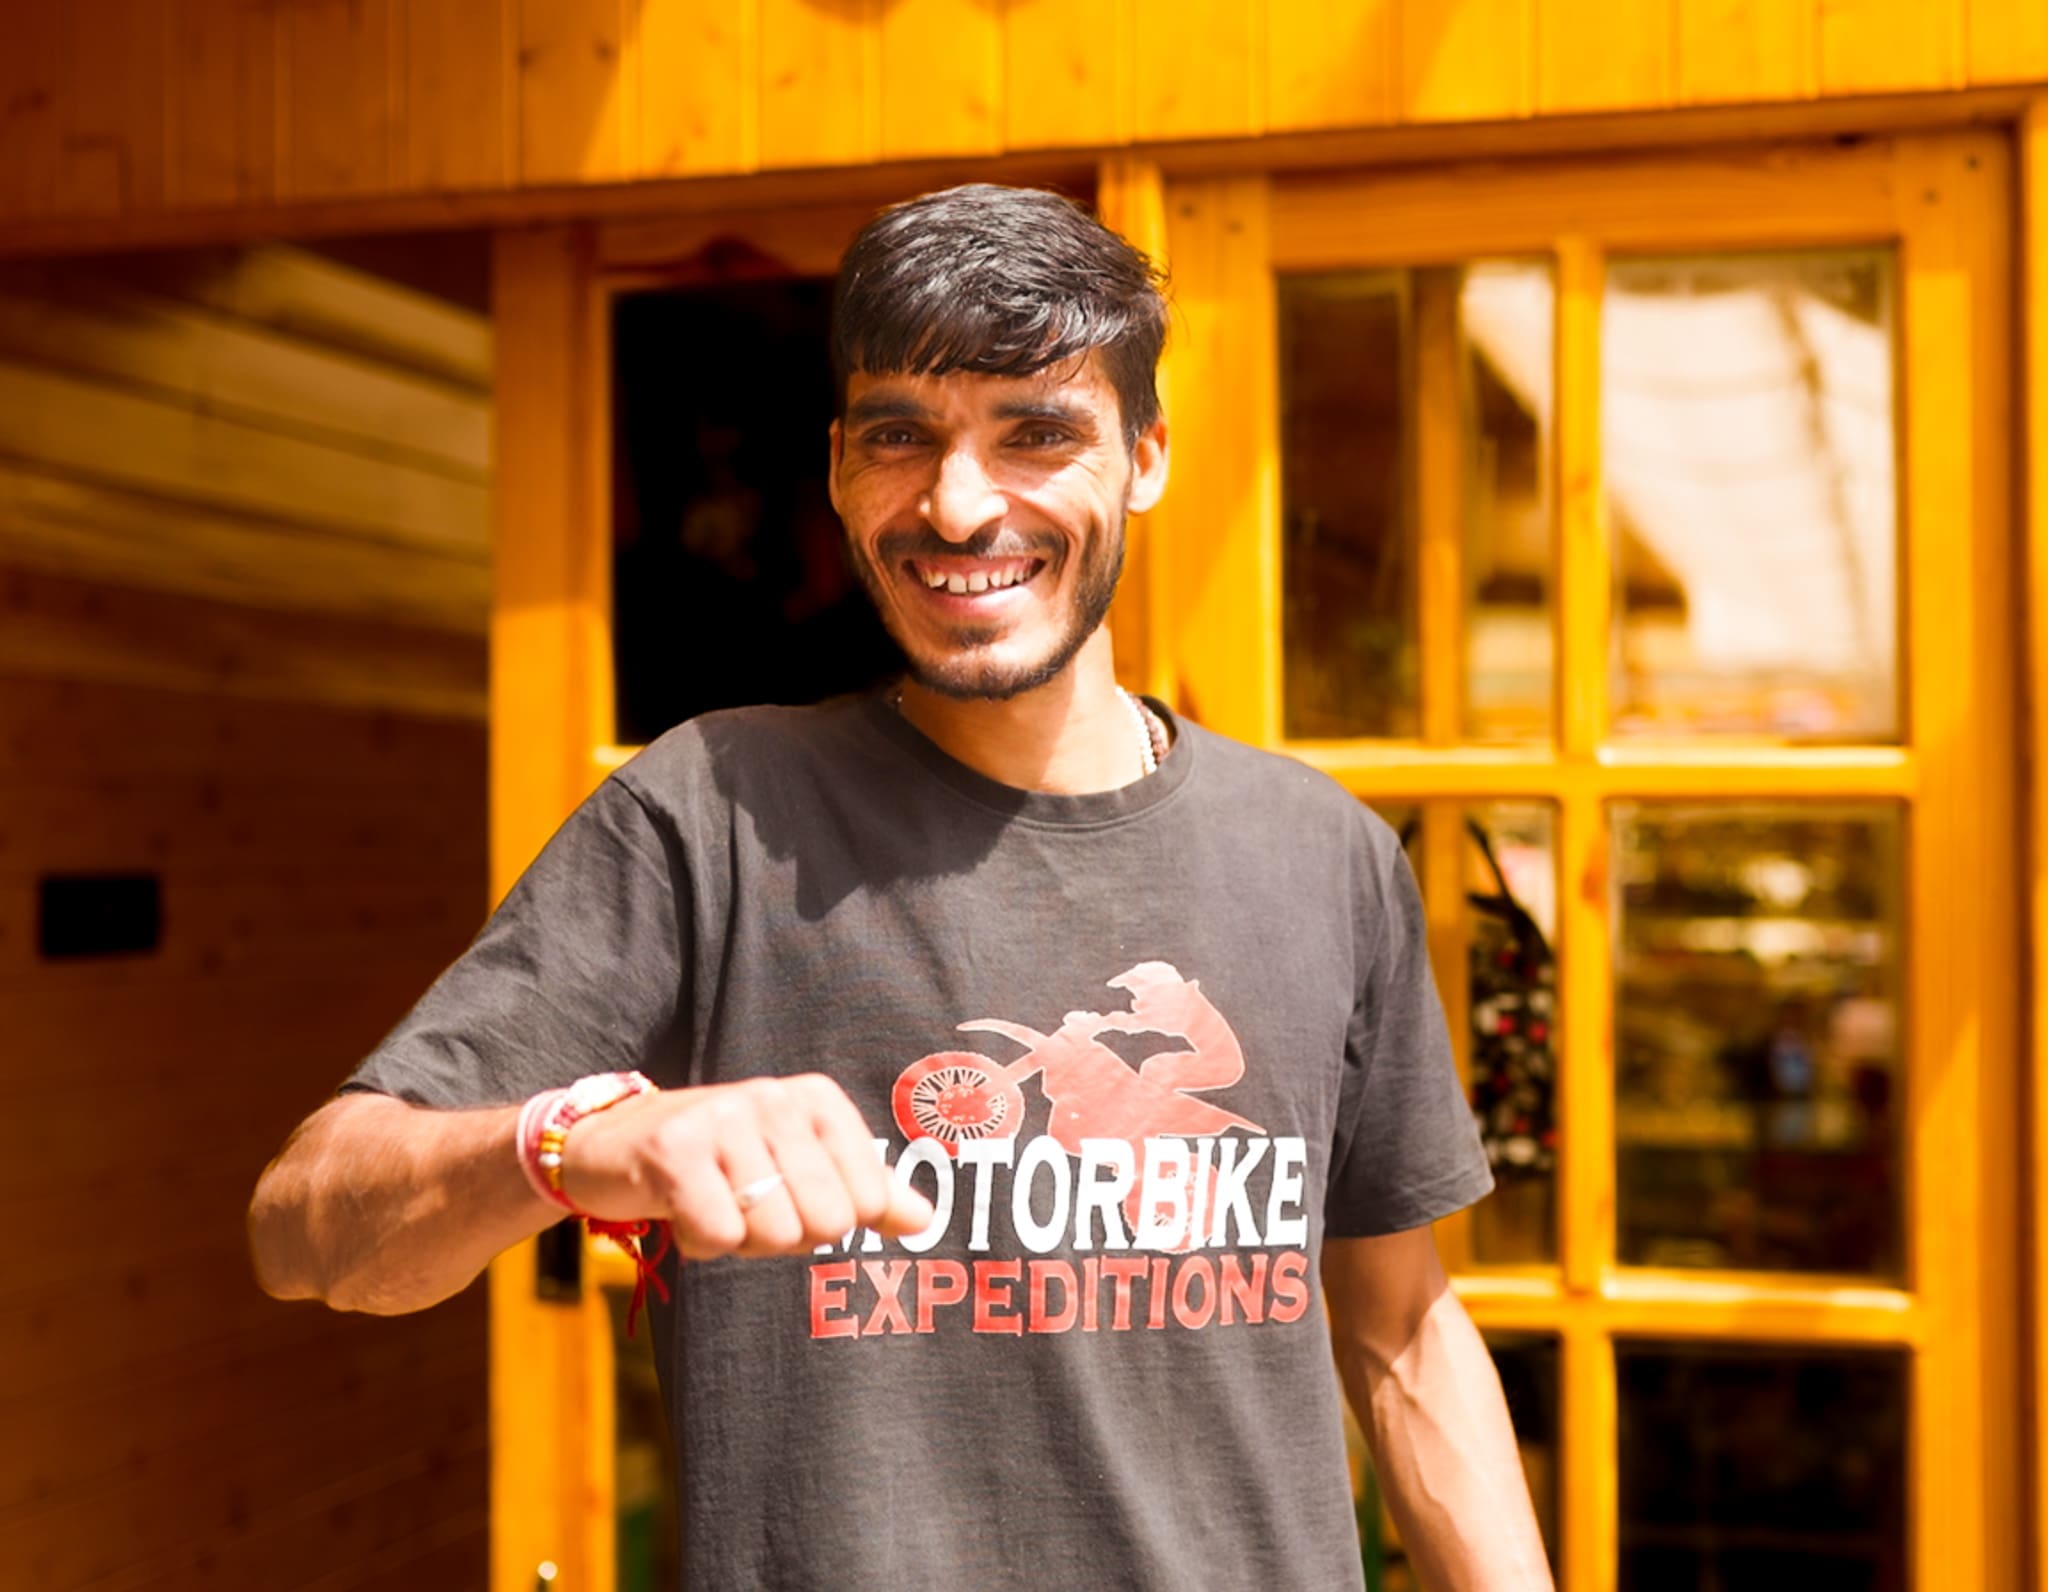 Khushwant, a mechanic at Motorbike Expeditions, smiling in front of a wooden lodge, representing the company's commitment to excellent customer service and expertise in motorbike maintenance.